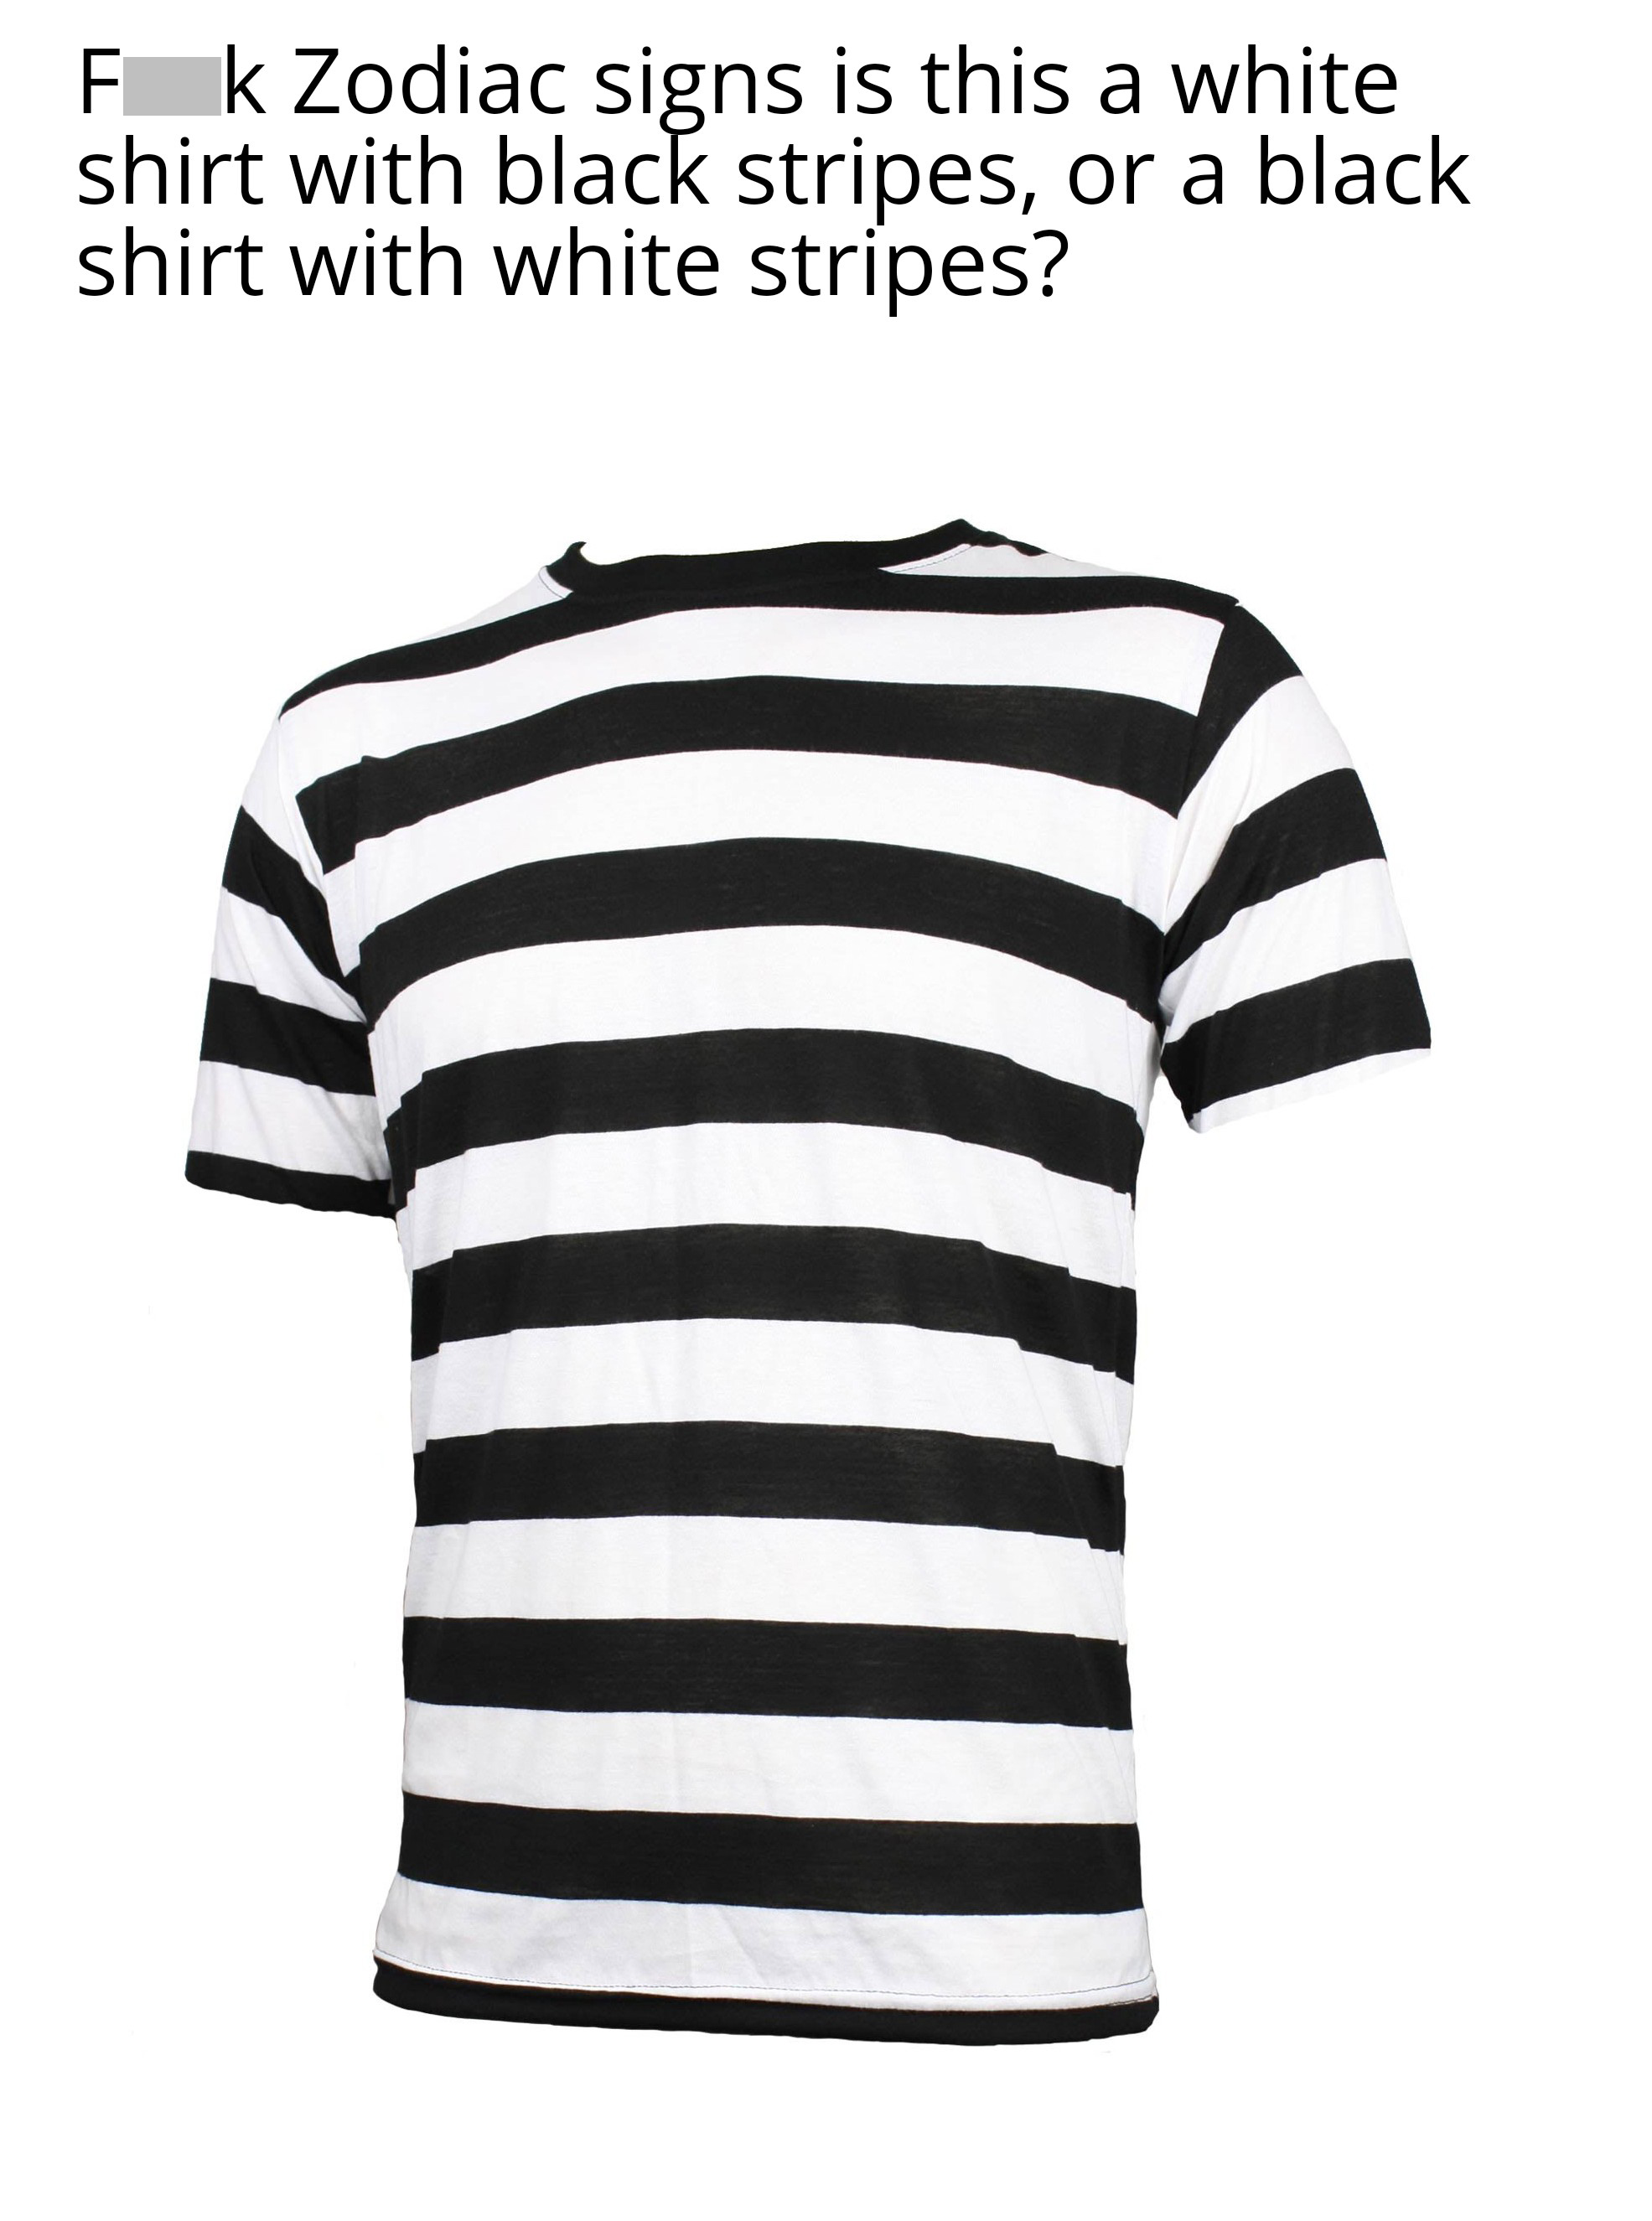 black and white striped shirt - Fk Zodiac signs is this a white shirt with black stripes, or a black shirt with white stripes?